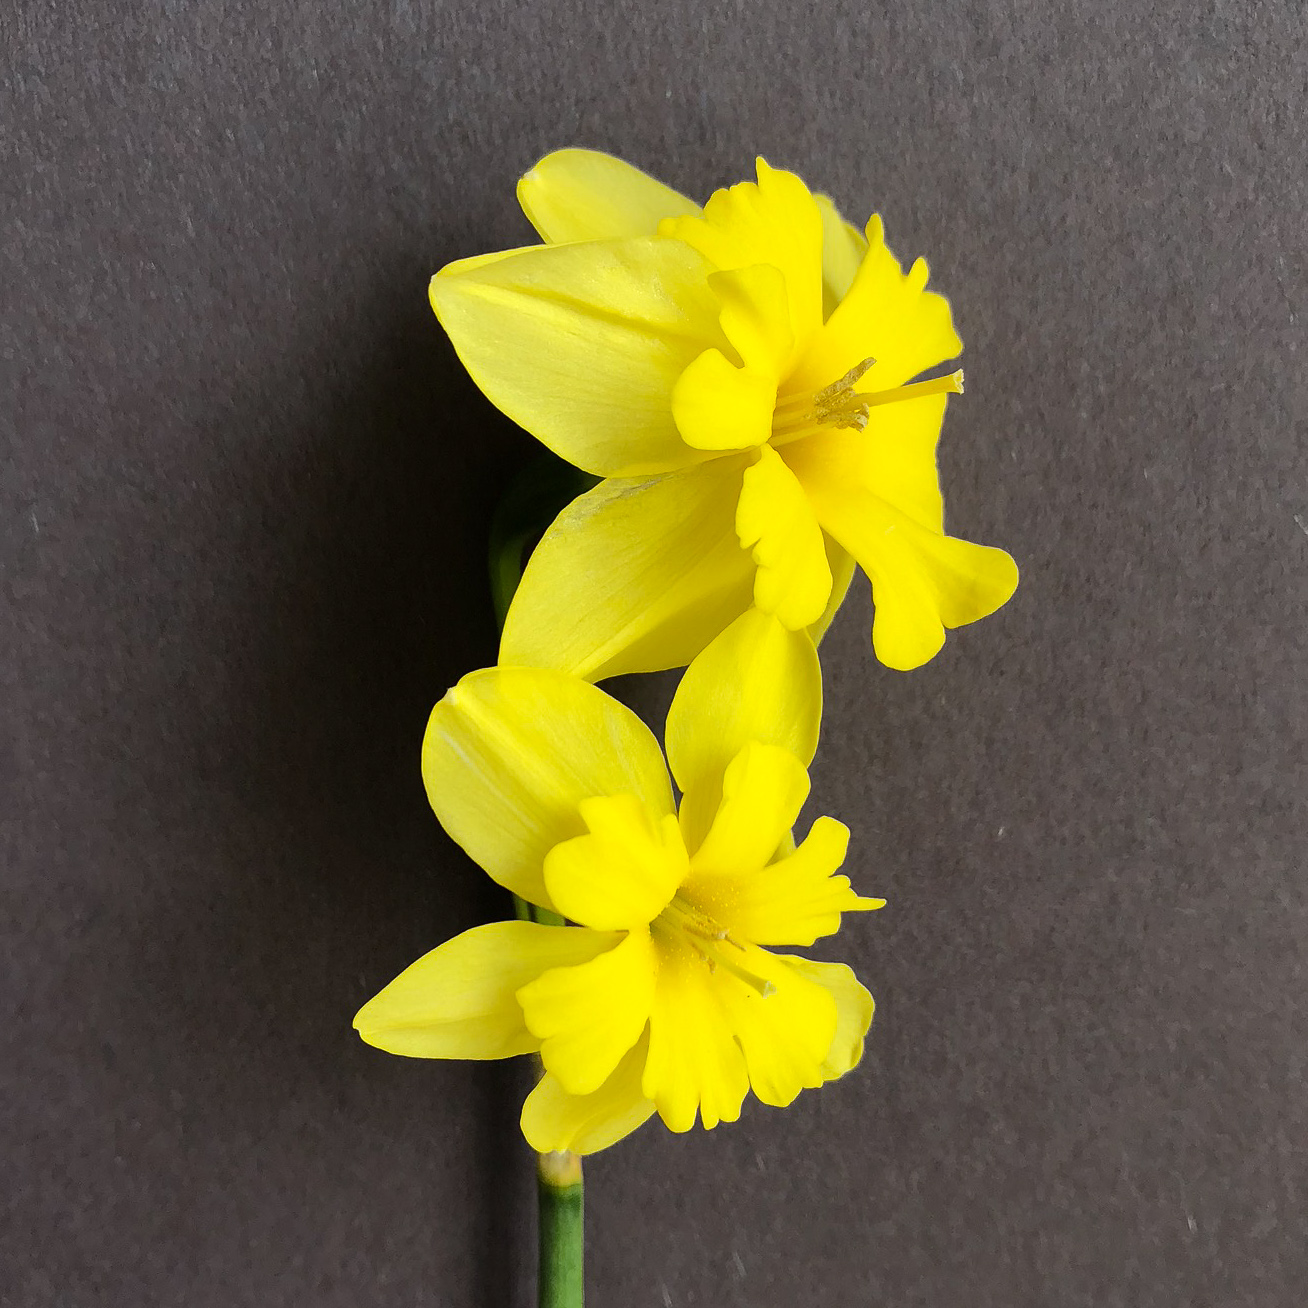 three quarter view of two narcissus tripartite flowers on a single stem